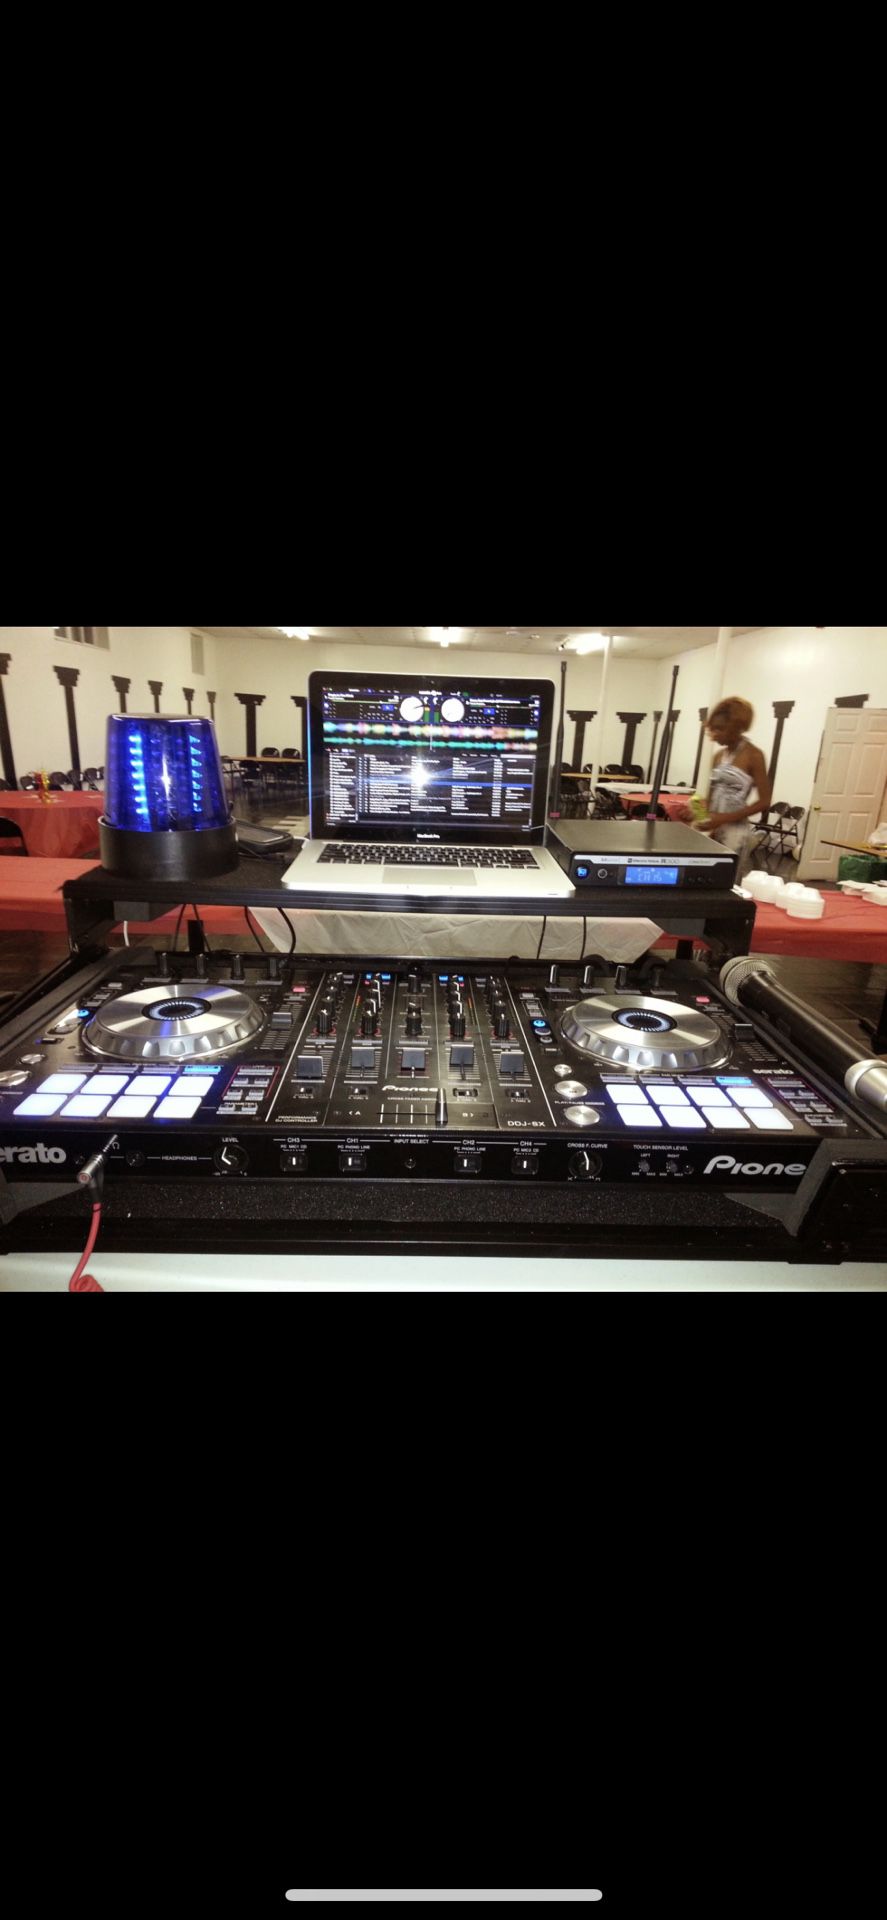 Speakers and DJ equipment for sale